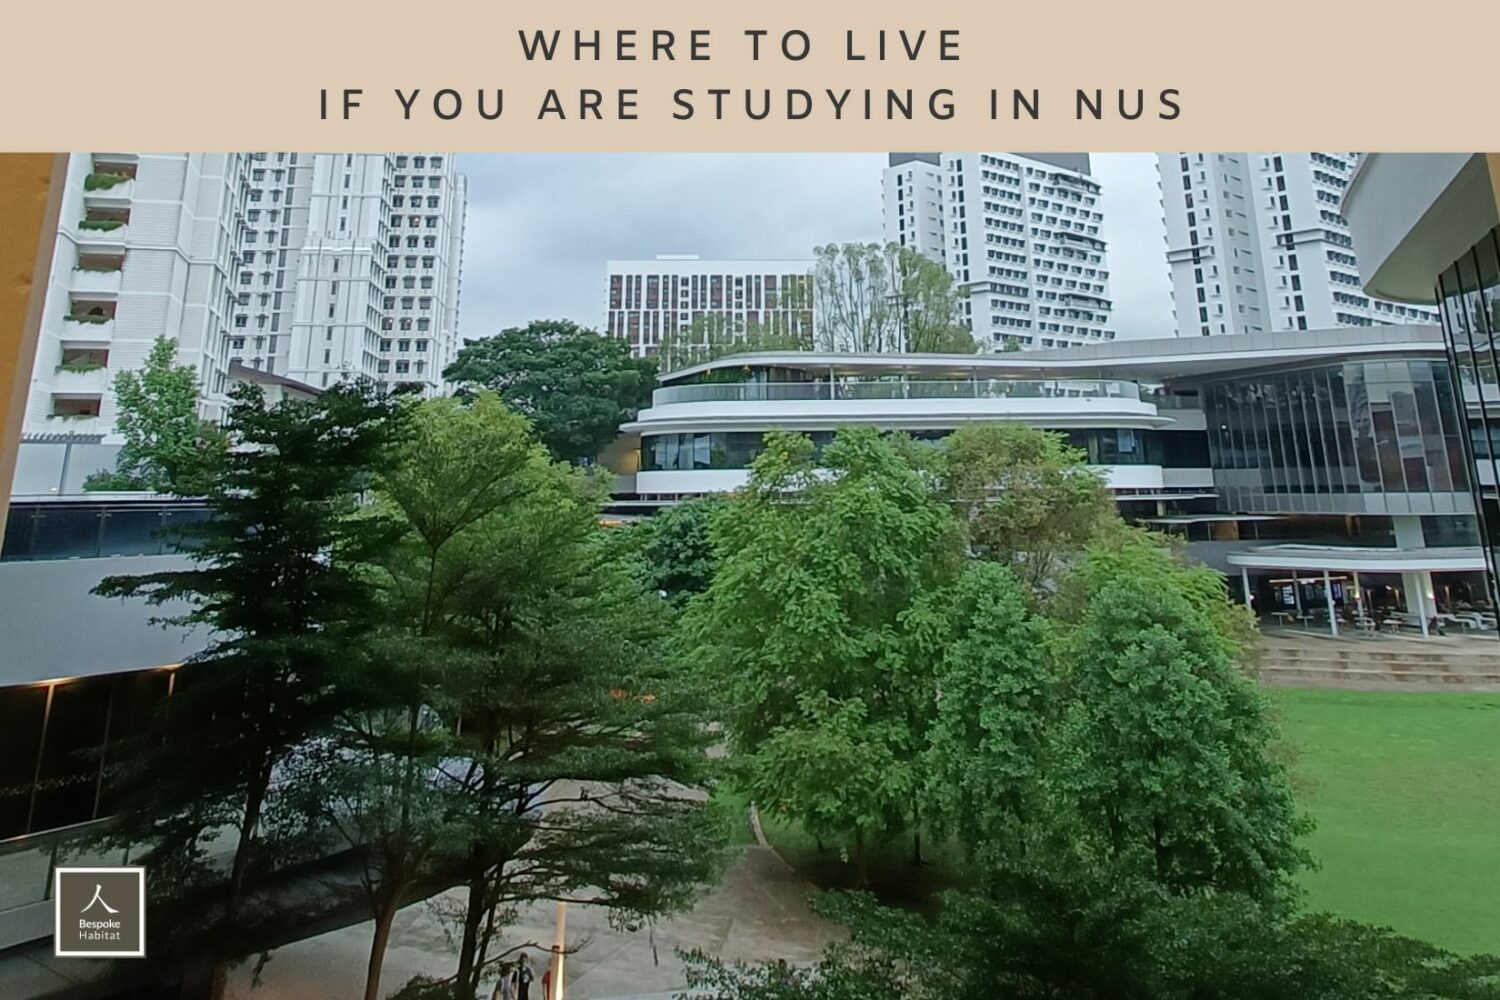 Where to Live If You Are Studying in NUS